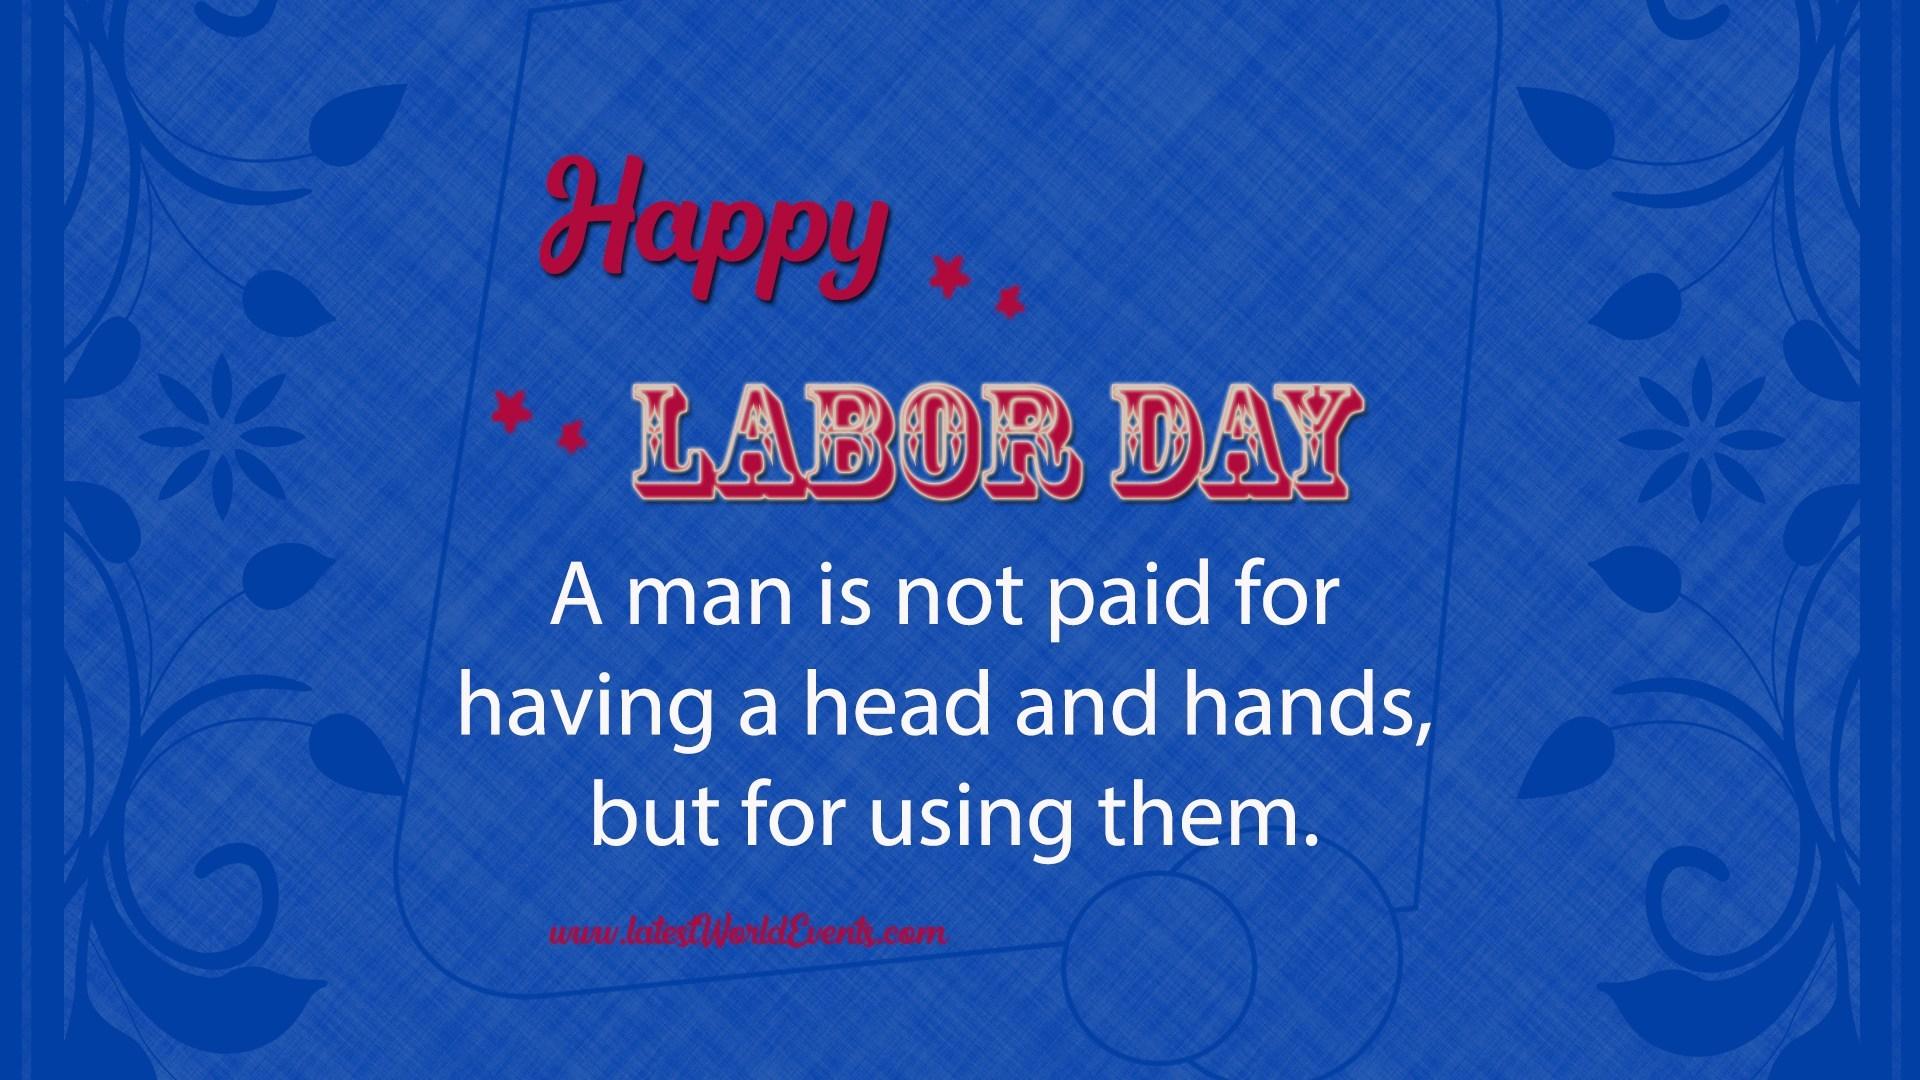 happy labor day image download Free From Here